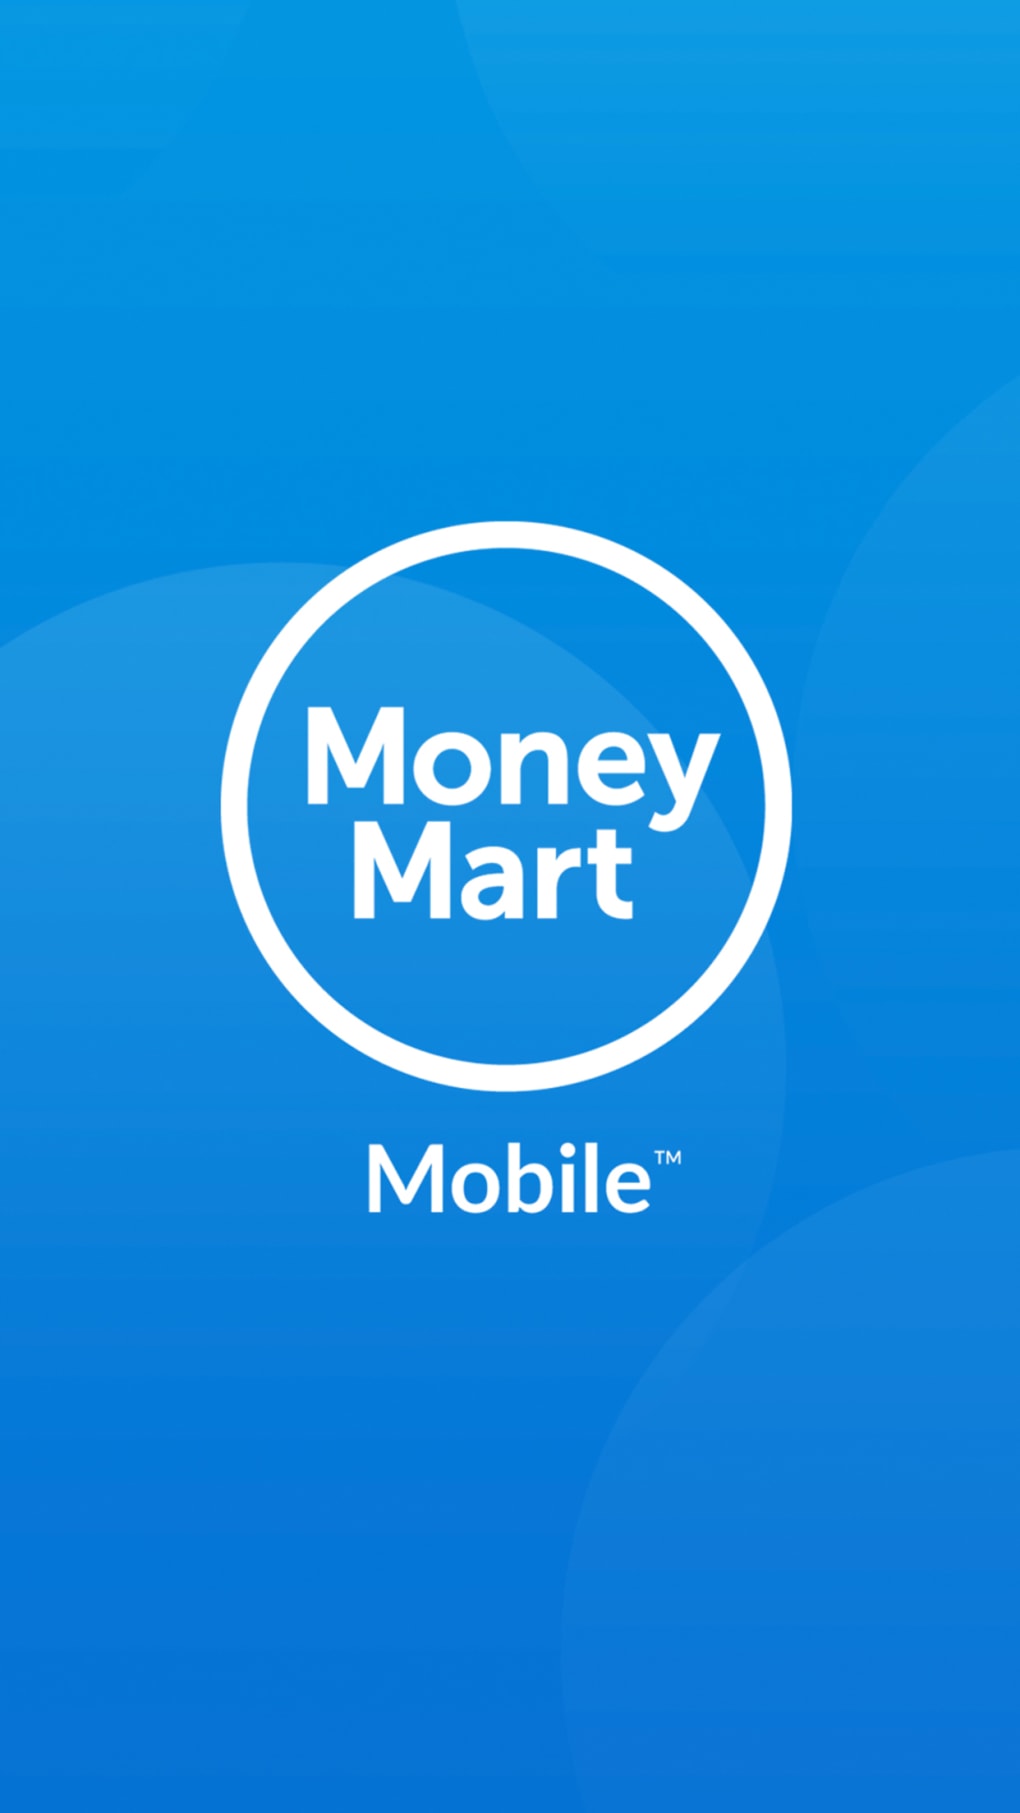 How to get inf money? - Monkey Mart Answers for Android